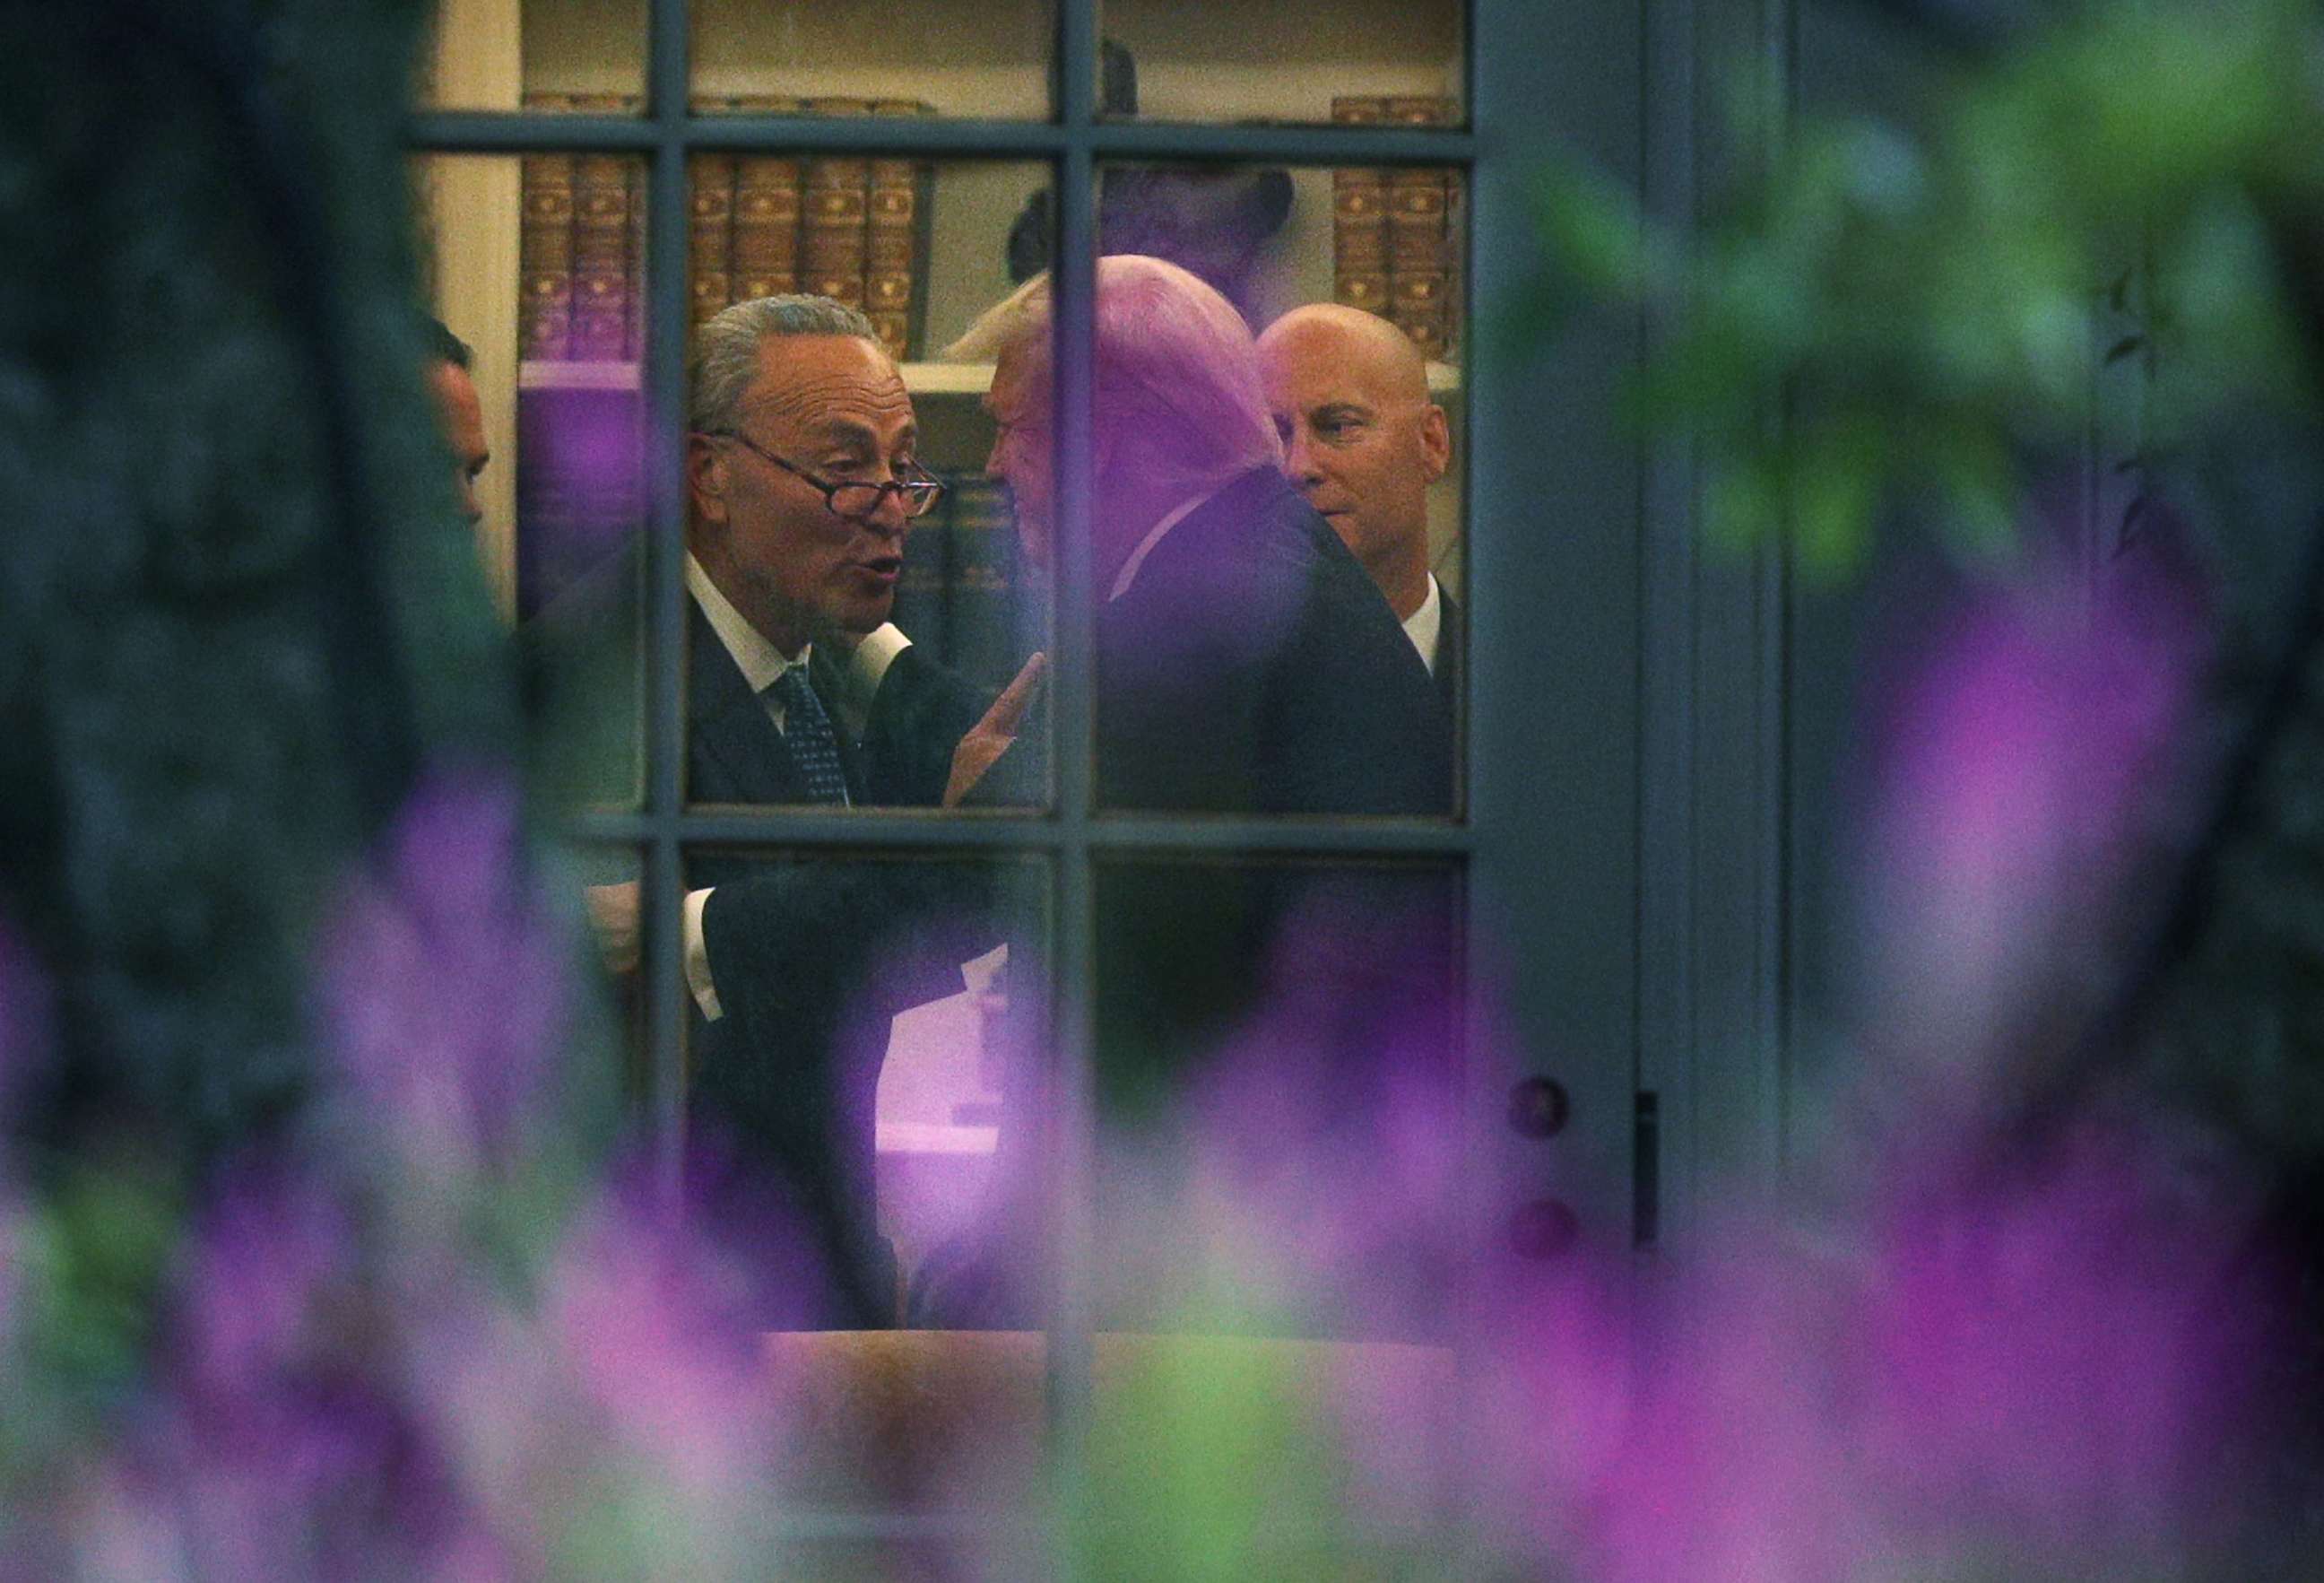 PHOTO: Senate Minority Leader Chuck Schumer makes a point to President Donald Trump in the Oval Office prior to his departure from the White House Sept. 6, 2017 in Washington.